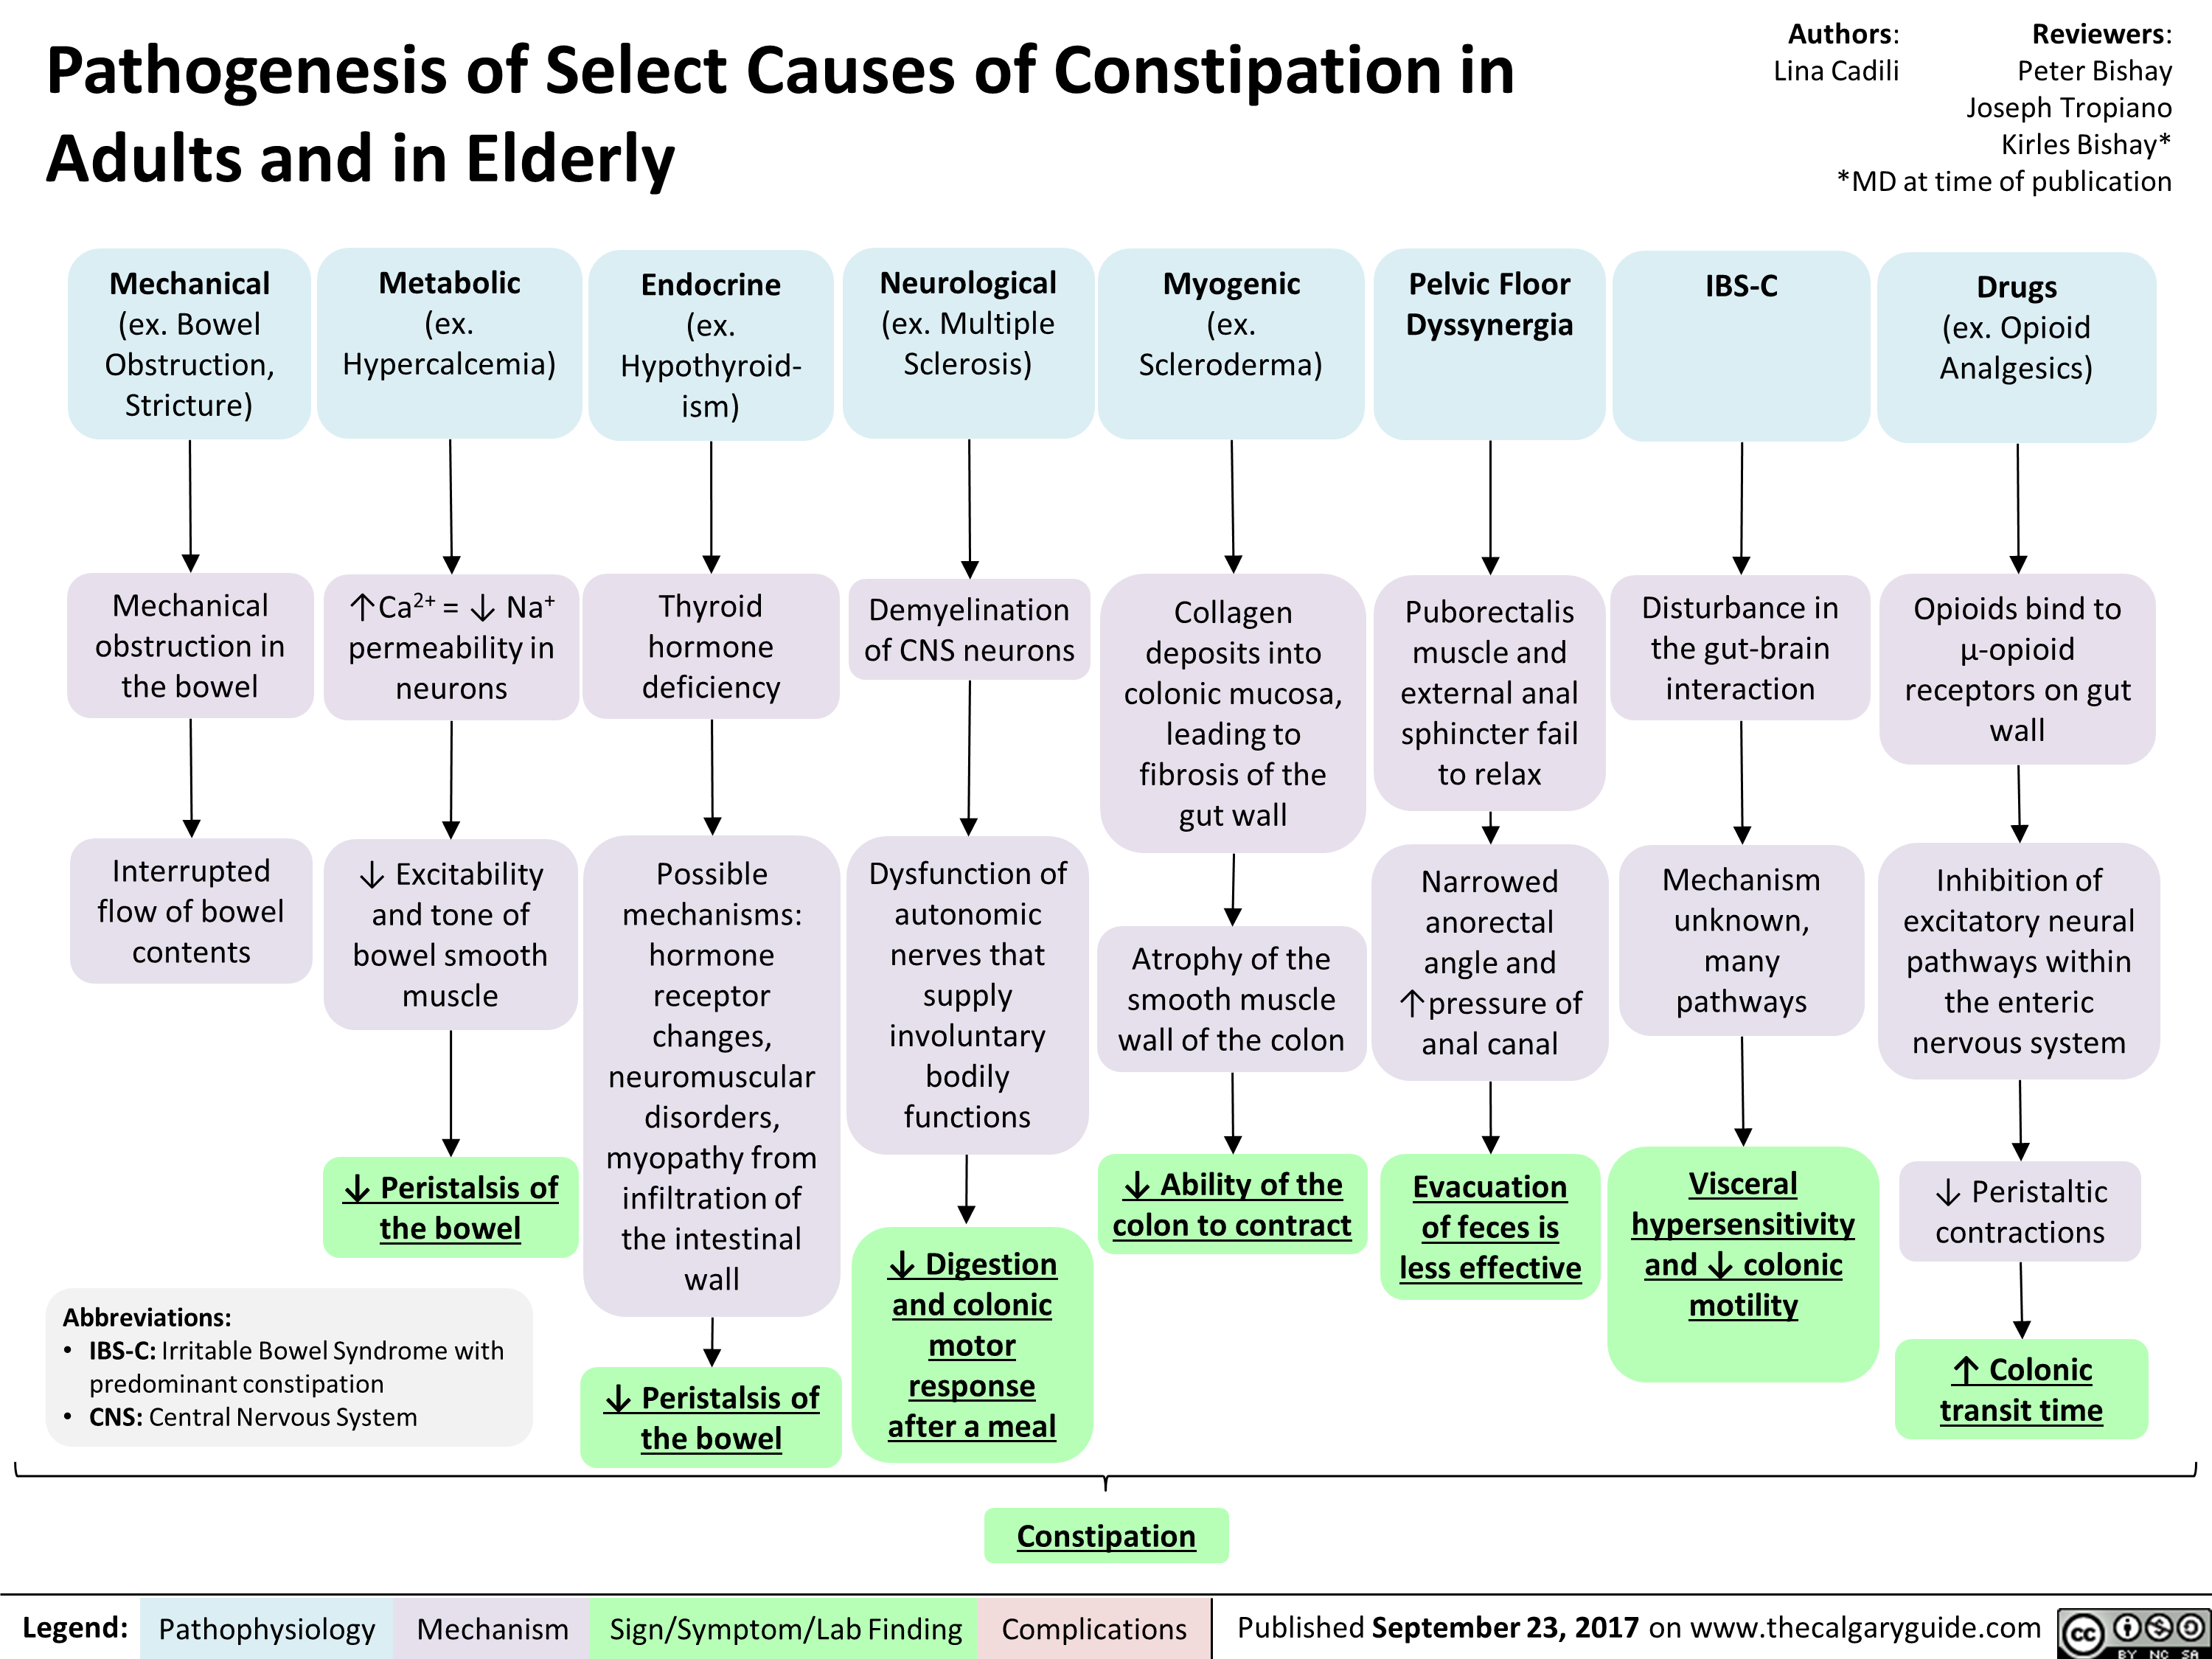 Pathogenesis of Select Causes of Constipation in Adults and in Elderly 
Authors: Reviewers: Lina Cadili Peter Bishay Joseph Tropiano Kirles Bishay* *MD at time of publication 
Mechanical Metabolic Endocrine Neurological Myogenic Pelvic Floor IBS-C Drugs (ex. Bowel (ex. (ex. (ex. Multiple (ex. Dyssynergia (ex. Opioid Obstruction, Stricture) Hypercalcemia) Hypothyroid-ism) Sclerosis) Scleroderma) Analgesics) 
Mechanical I`Ca2+ = 4, Na+ Thyroid Demyelination Collagen Puborectalis Disturbance in obstruction in permeability in hormone of CNS neurons deposits into muscle and the gut-brain the bowel neurons deficiency colonic mucosa, leading to external anal sphincter fail interaction fibrosis of the gut wall to relax Interrupted 4, Excitability Possible Dysfunction of Narrowed Mechanism flow of bowel contents and tone of bowel smooth mechanisms: hormone autonomic nerves that anorectal angle and unknown, many Atrophy of the muscle receptor supply smooth muscle '`pressure of pathways changes, involuntary wall of the colon anal canal neuromuscular disorders, myopathy from bodily functions 1, Peristalsis of infiltration of 4, Ability of the Evacuation Visceral the bowel colon to contract of feces is hypersensitivity Abbreviations: the intestinal wall 4, Digestion less effective and 4, colonic and colonic motility motor • IBS-C: Irritable Bowel Syndrome with predominant constipation • CNS: Central Nervous System 4, Peristalsis of response after a meal the bowel  
Opioids bind to Lt-opioid receptors on gut wall 
Inhibition of excitatory neural pathways within the enteric nervous system 
1, Peristaltic contractions 
1 
l• Colonic  transit time 